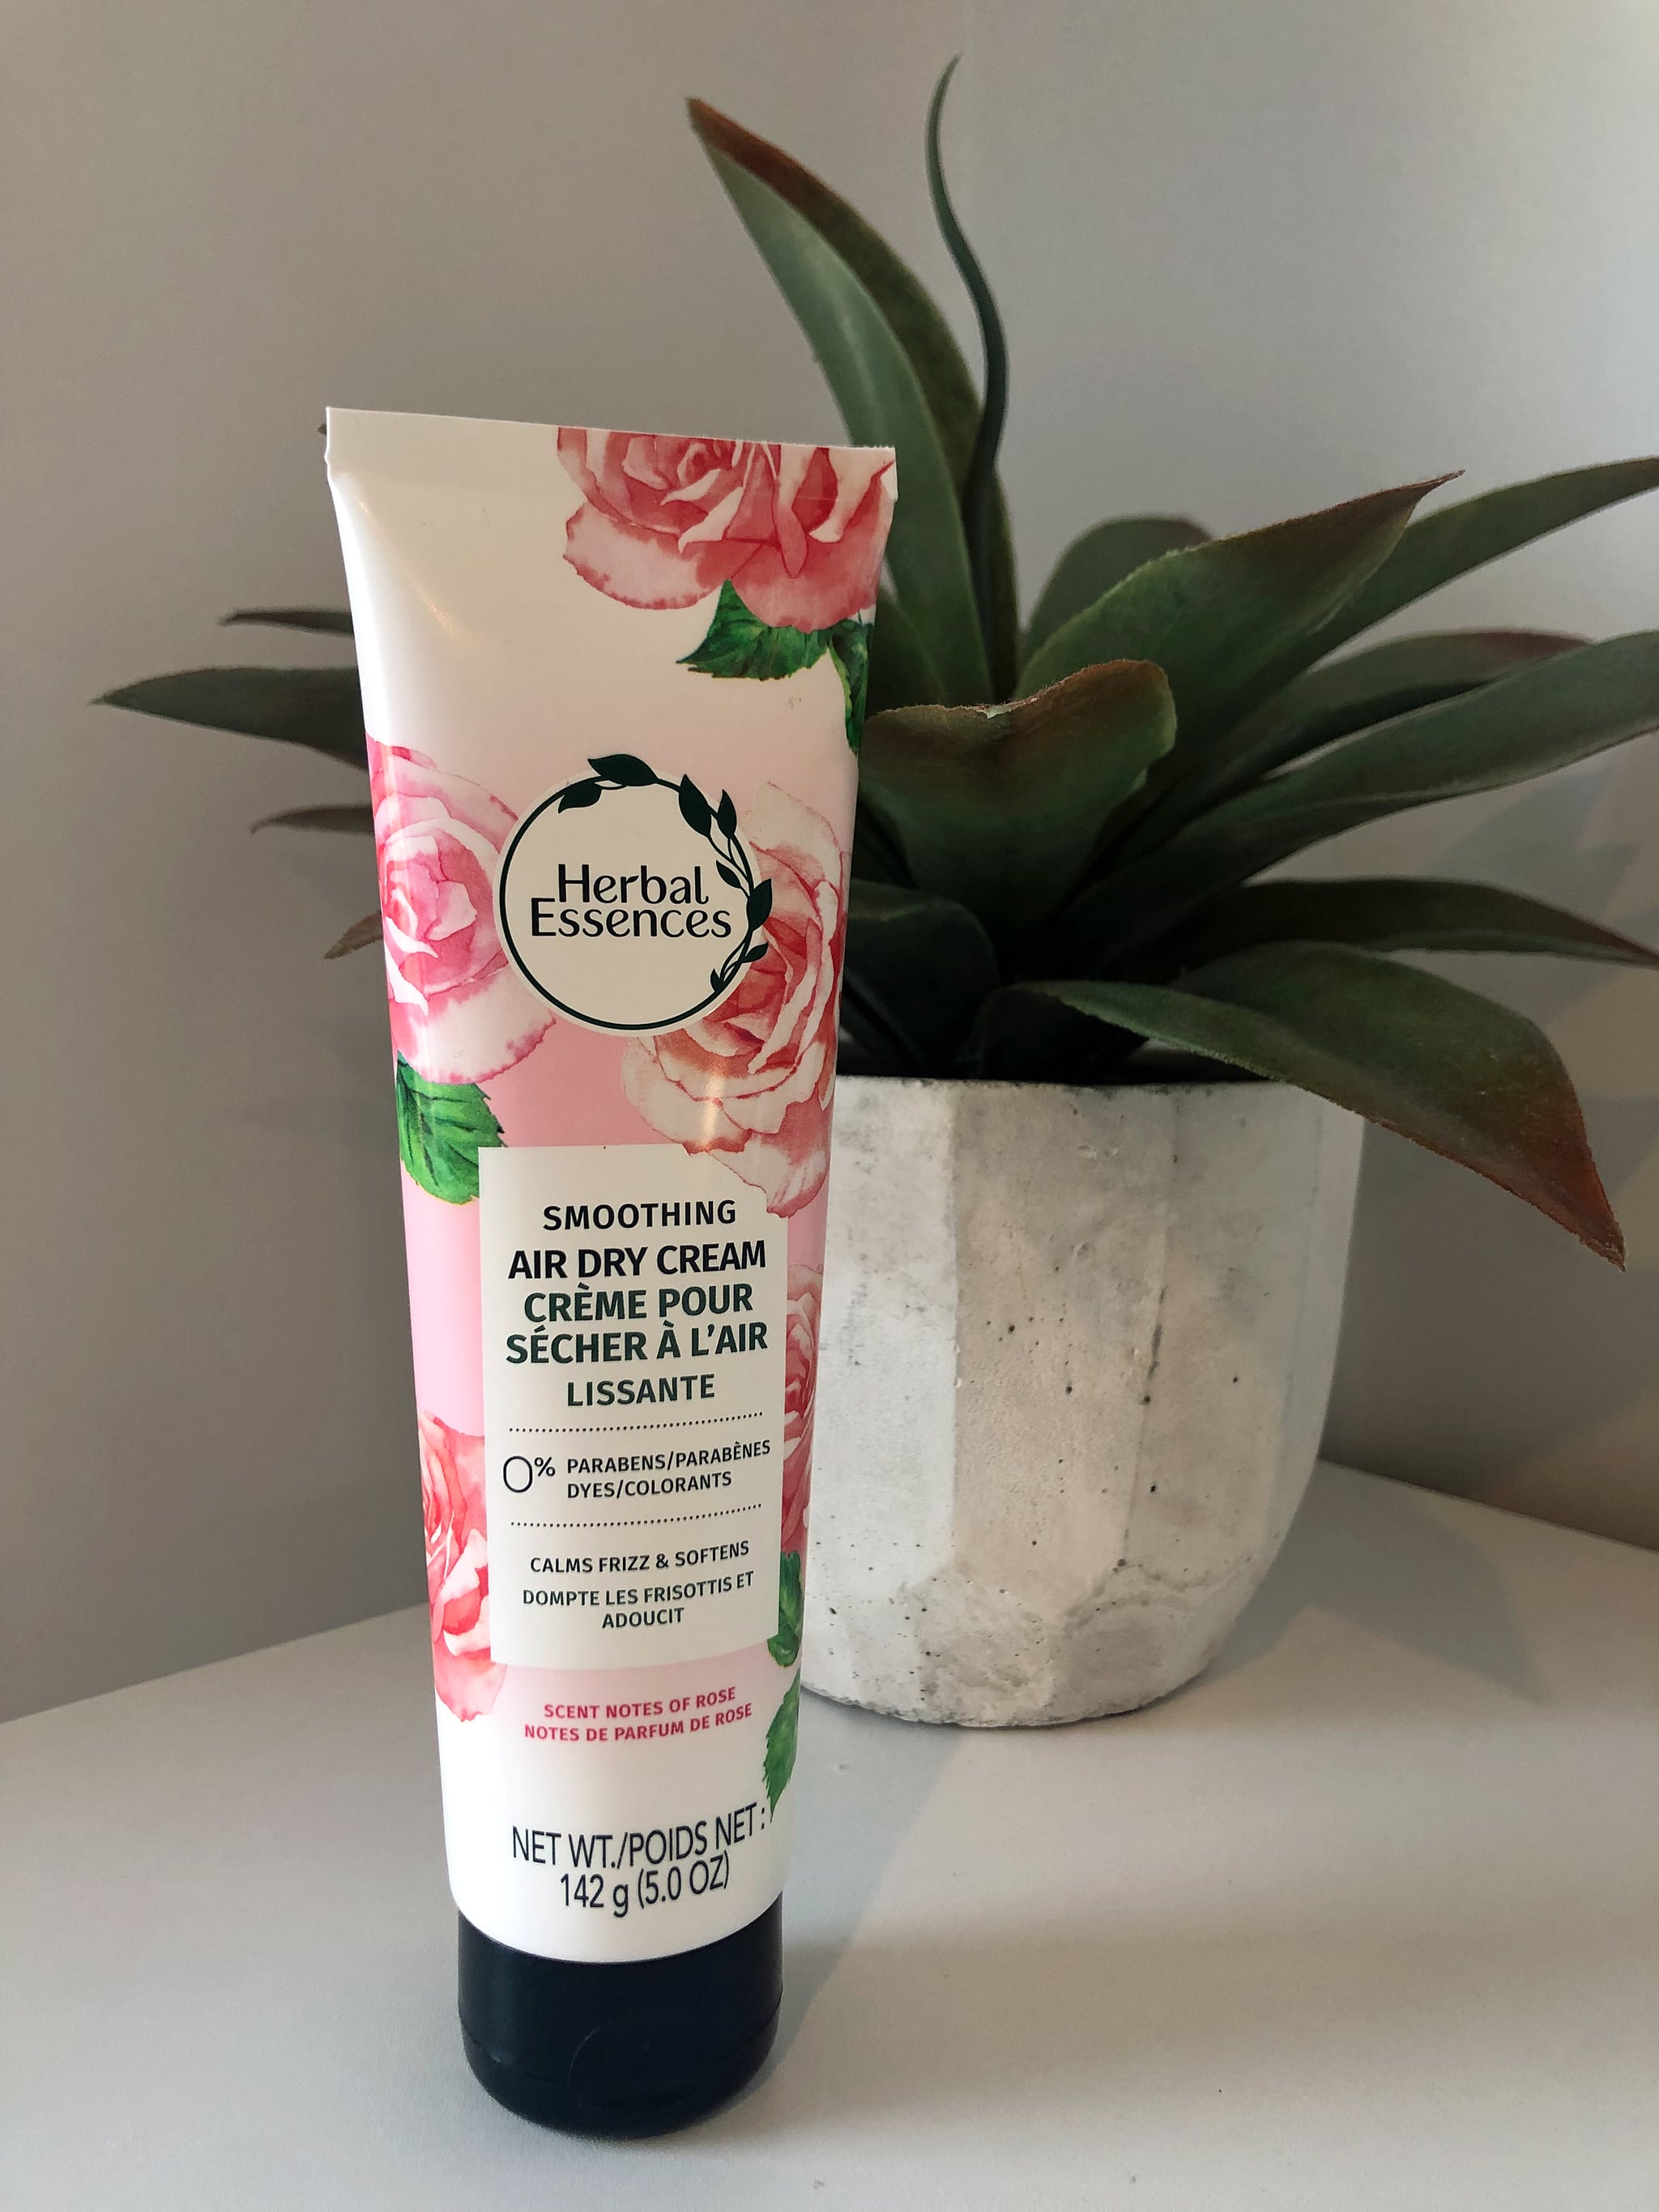 Herbal Essences's new Smoothing Air Dry Cream.